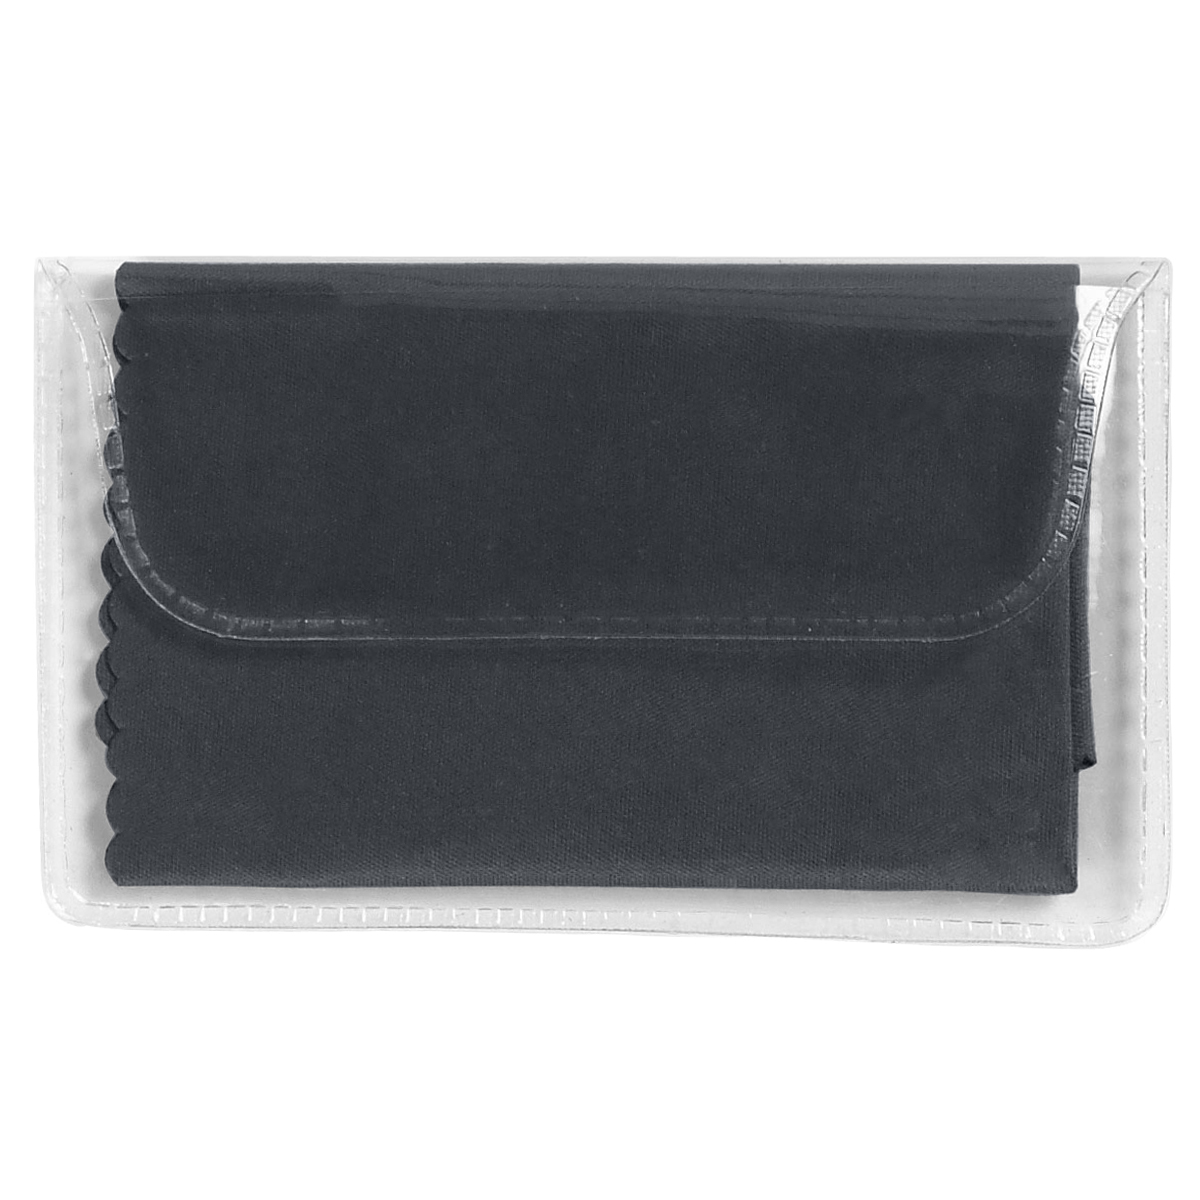 Imprinted Microfiber Cleaning Cloth In Case